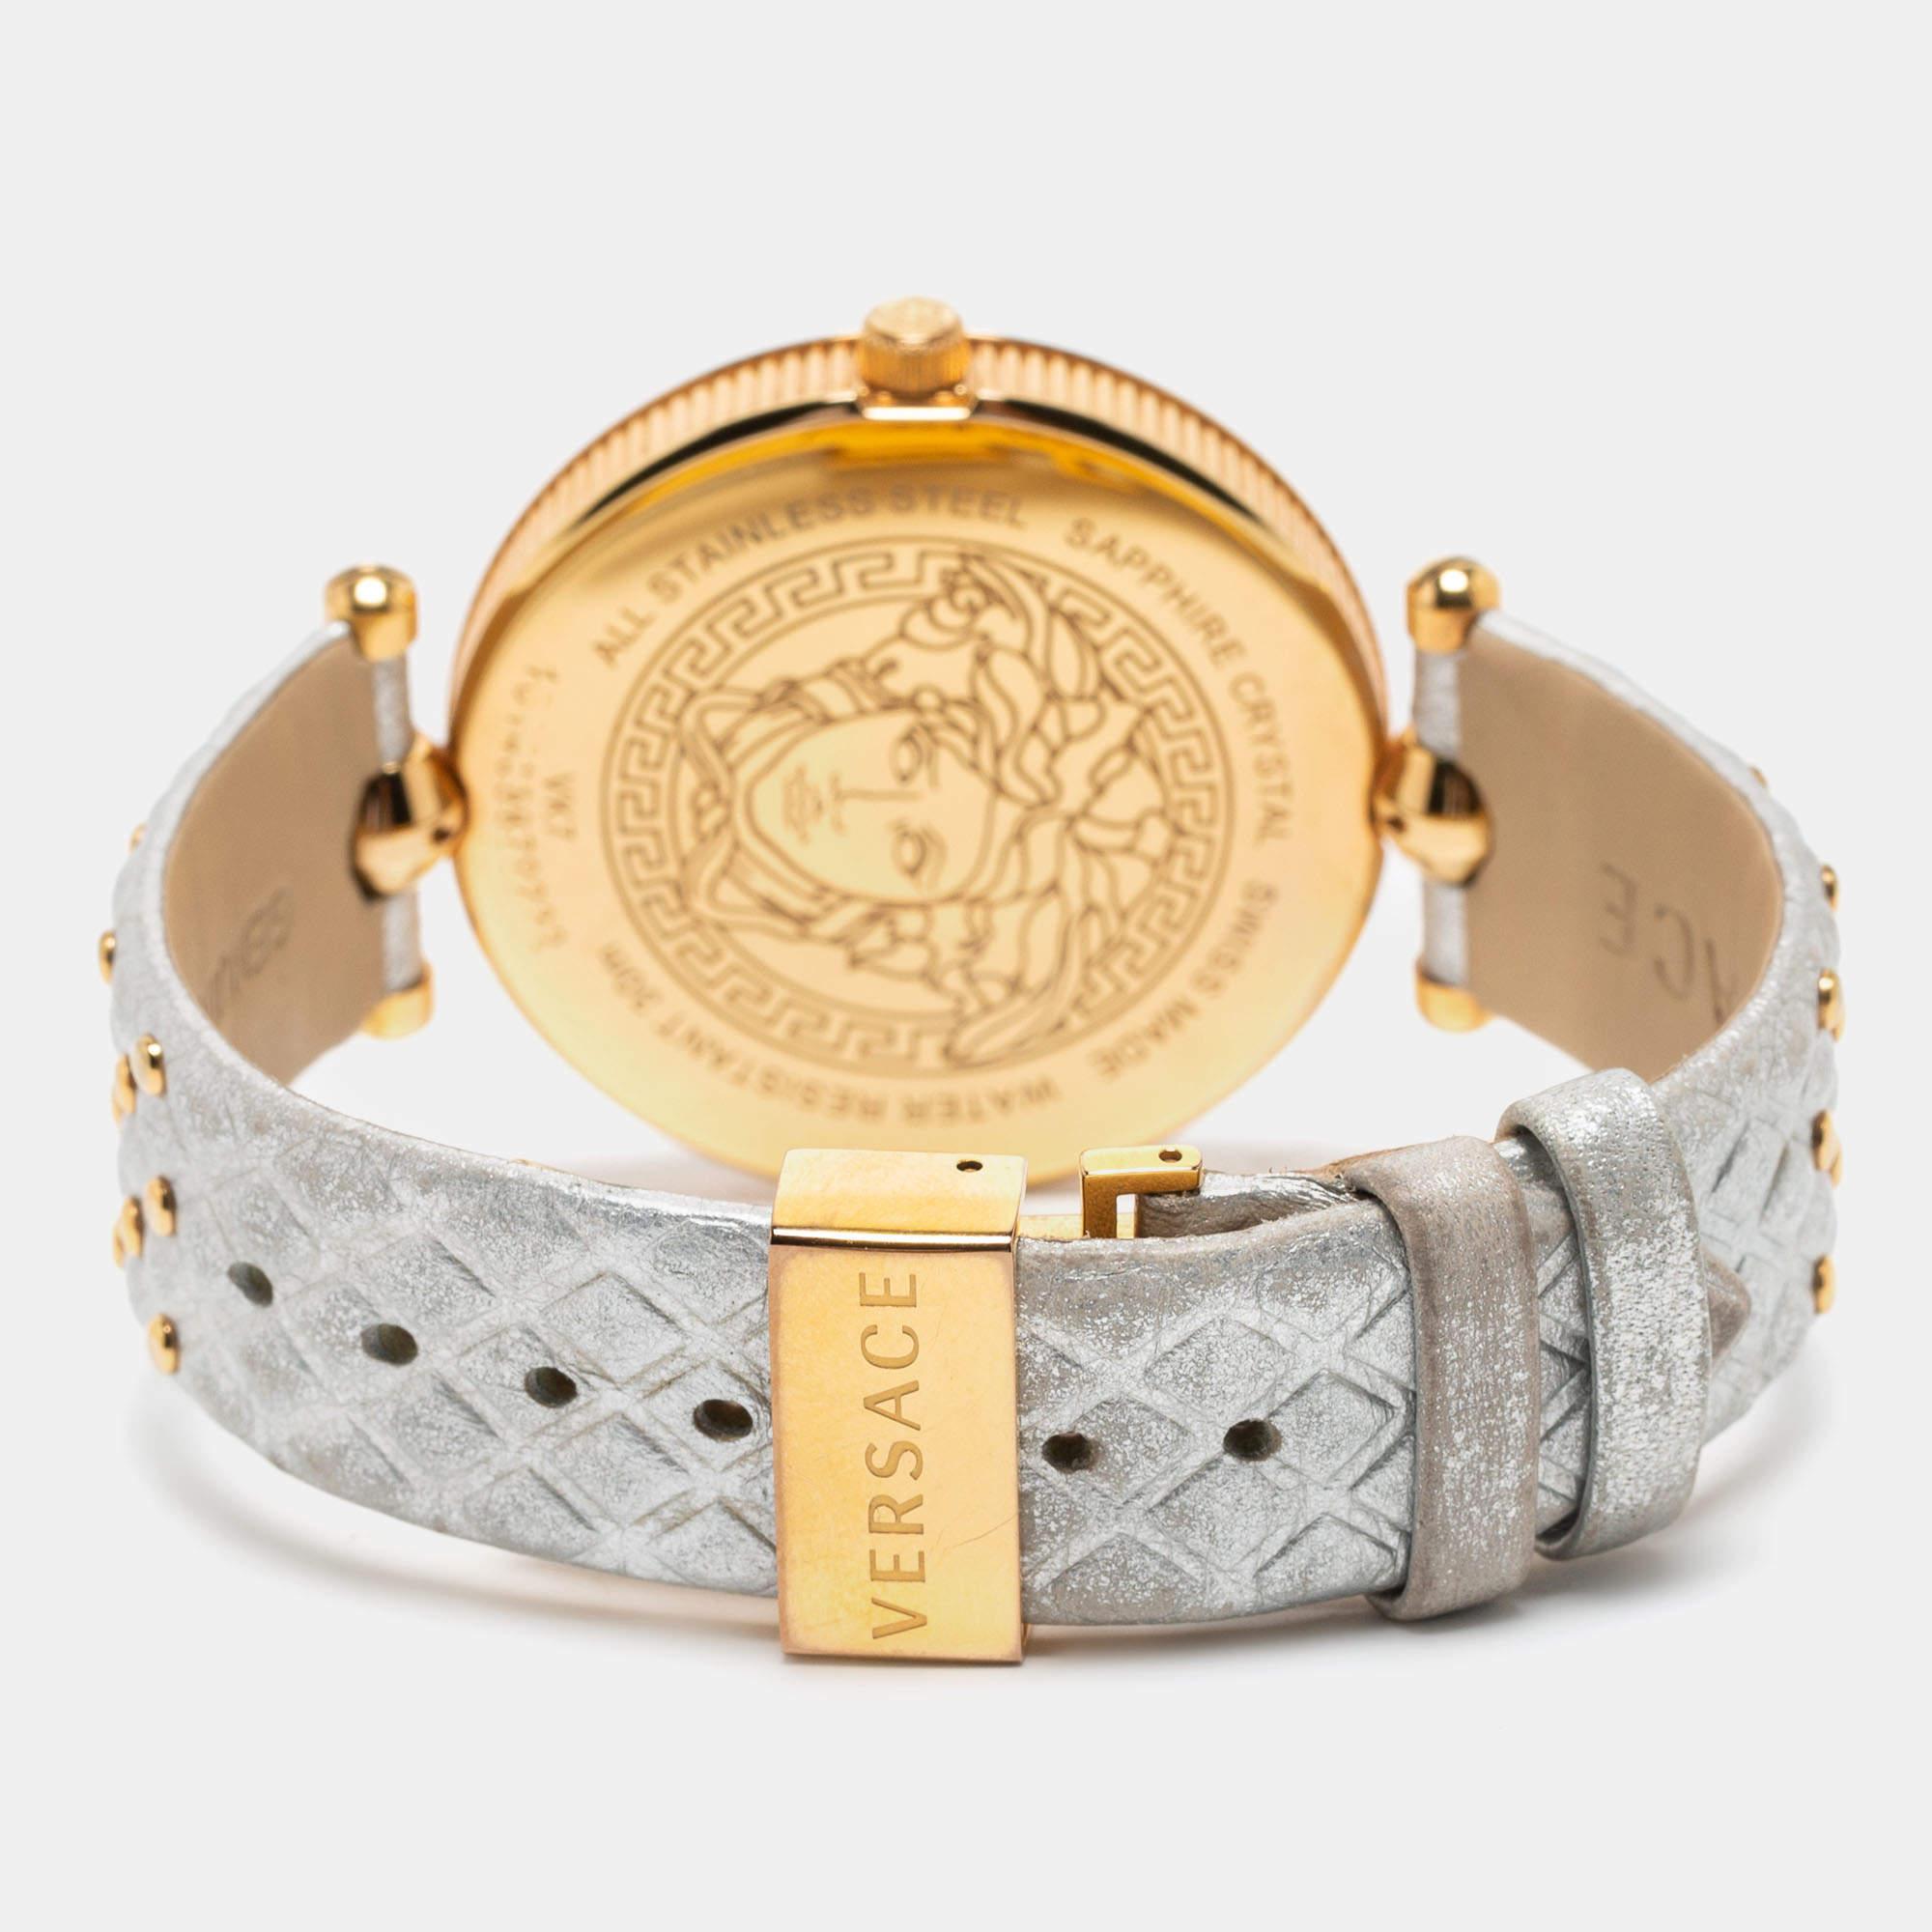 Your everyday style deserves the touch of luxury brought by this wristwatch from Versace. Crafted from rose gold-plated stainless steel, the designer watch is set with a sturdy case, a silver dial, and a comfortable bracelet.

Includes: Original